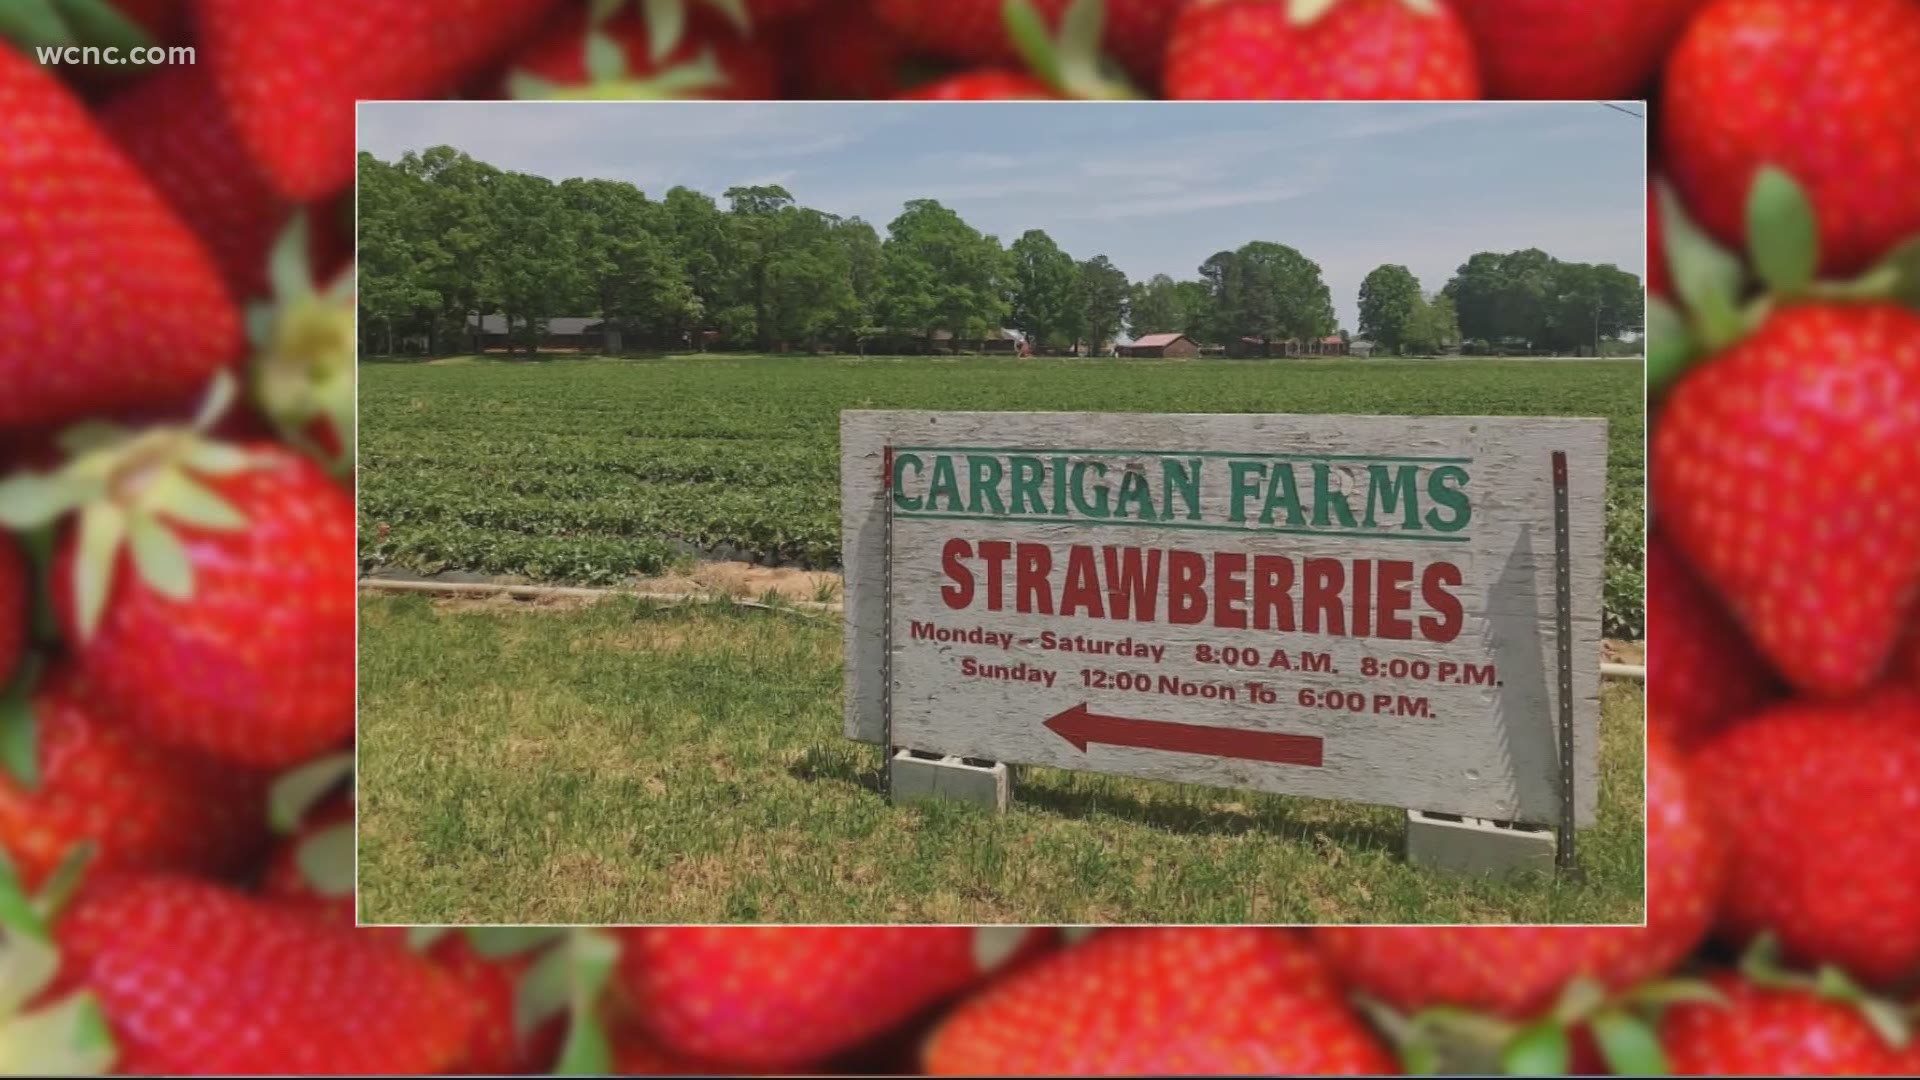 Carrigan Farms in Mooresville has 5 acres of strawberries ripe and ready for families to pick.